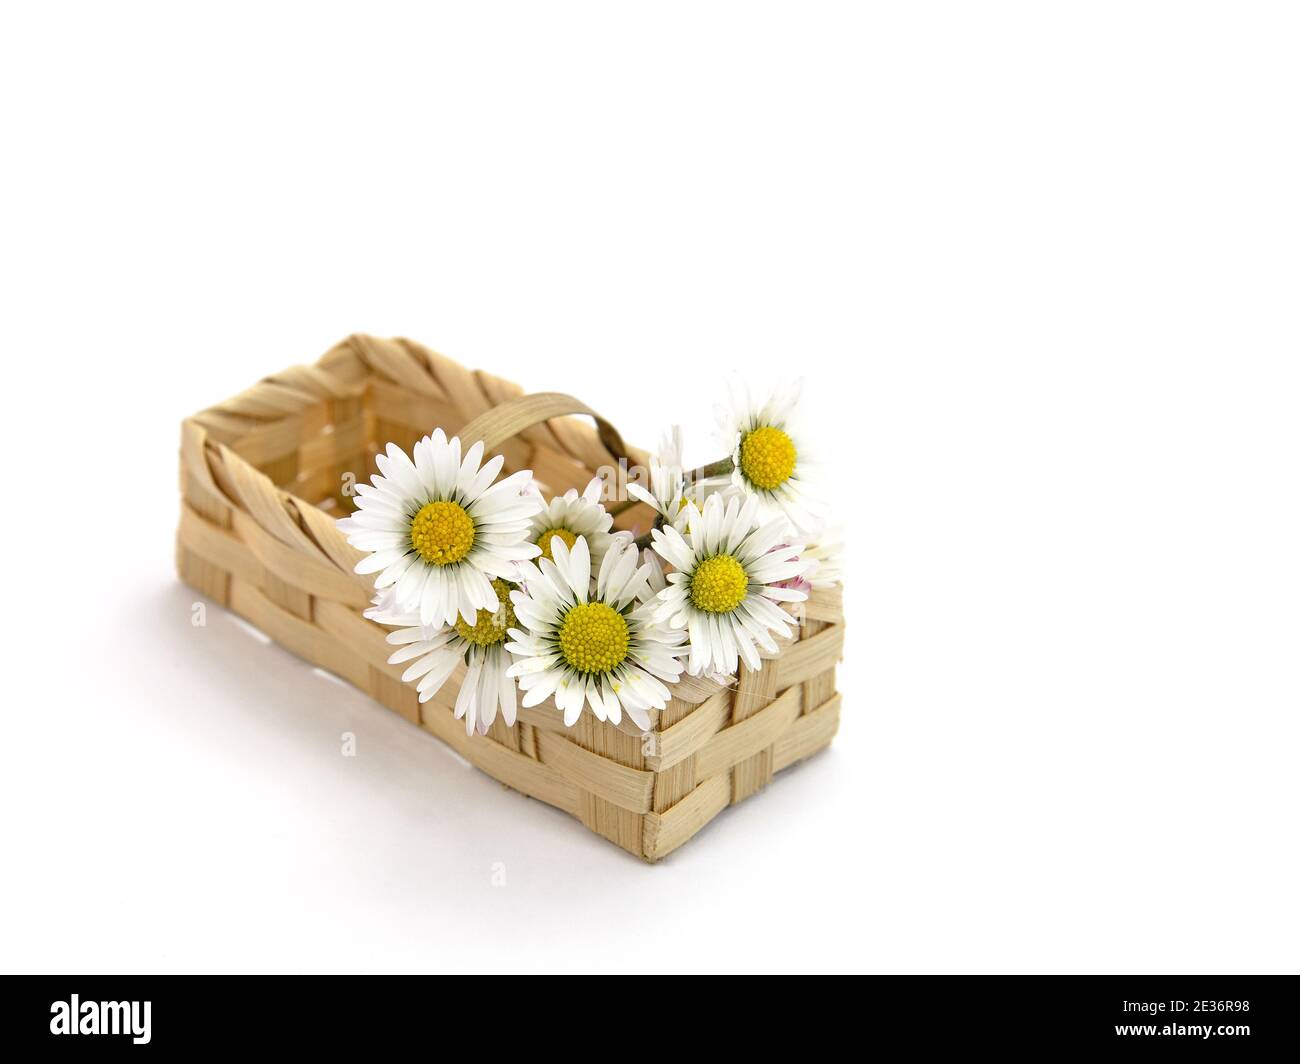 Daisies, Bellis perennis, in basket against white background Stock Photo